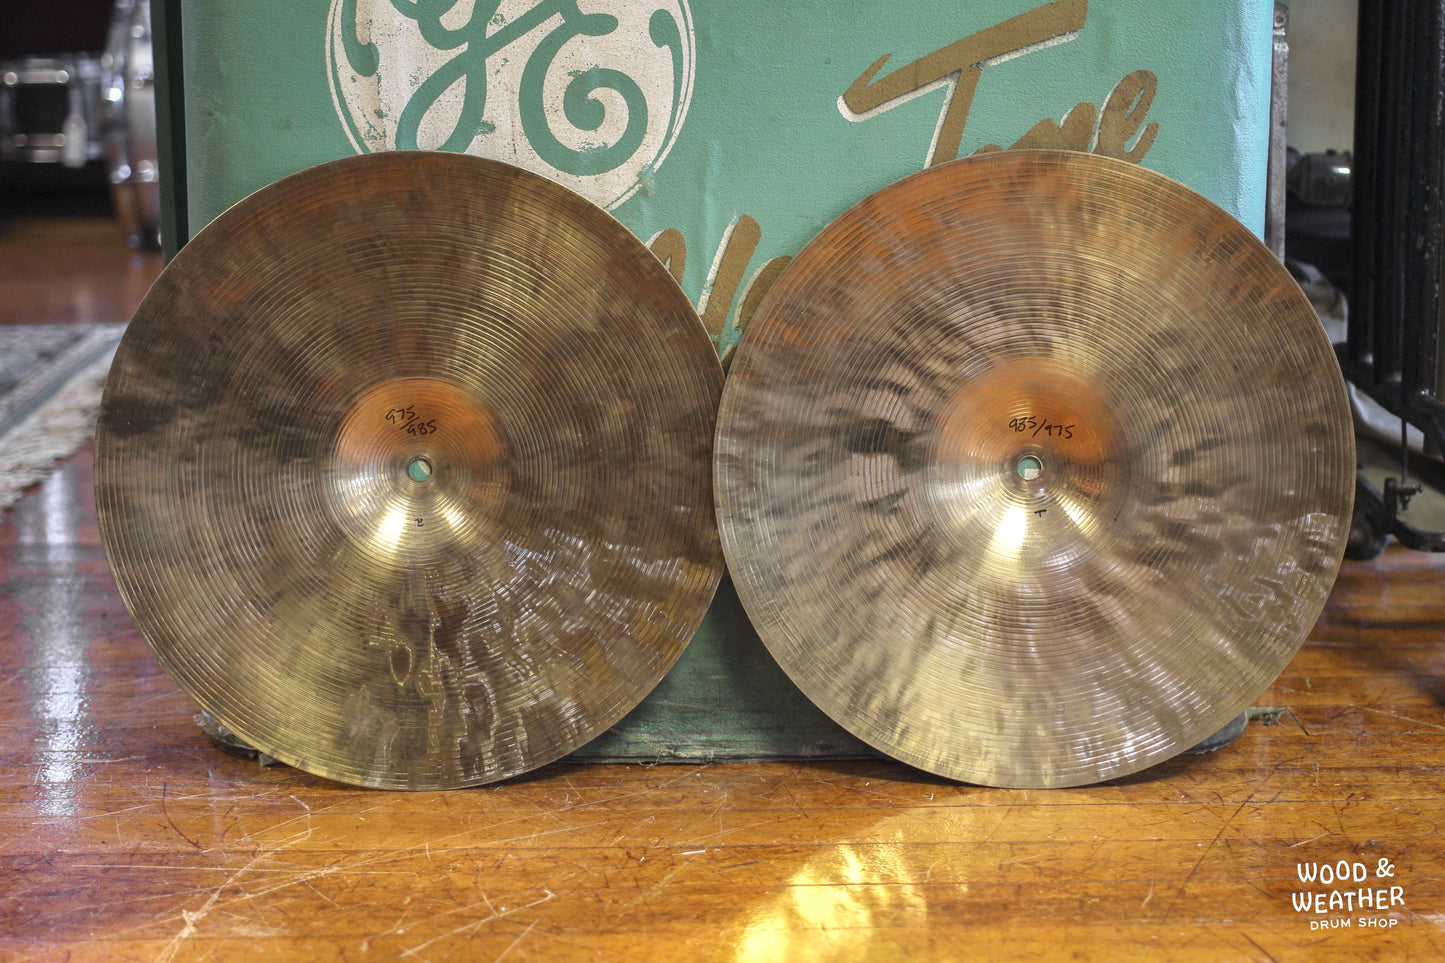 Used Wuhan 14" Hi-Hat Cymbals 975/985g